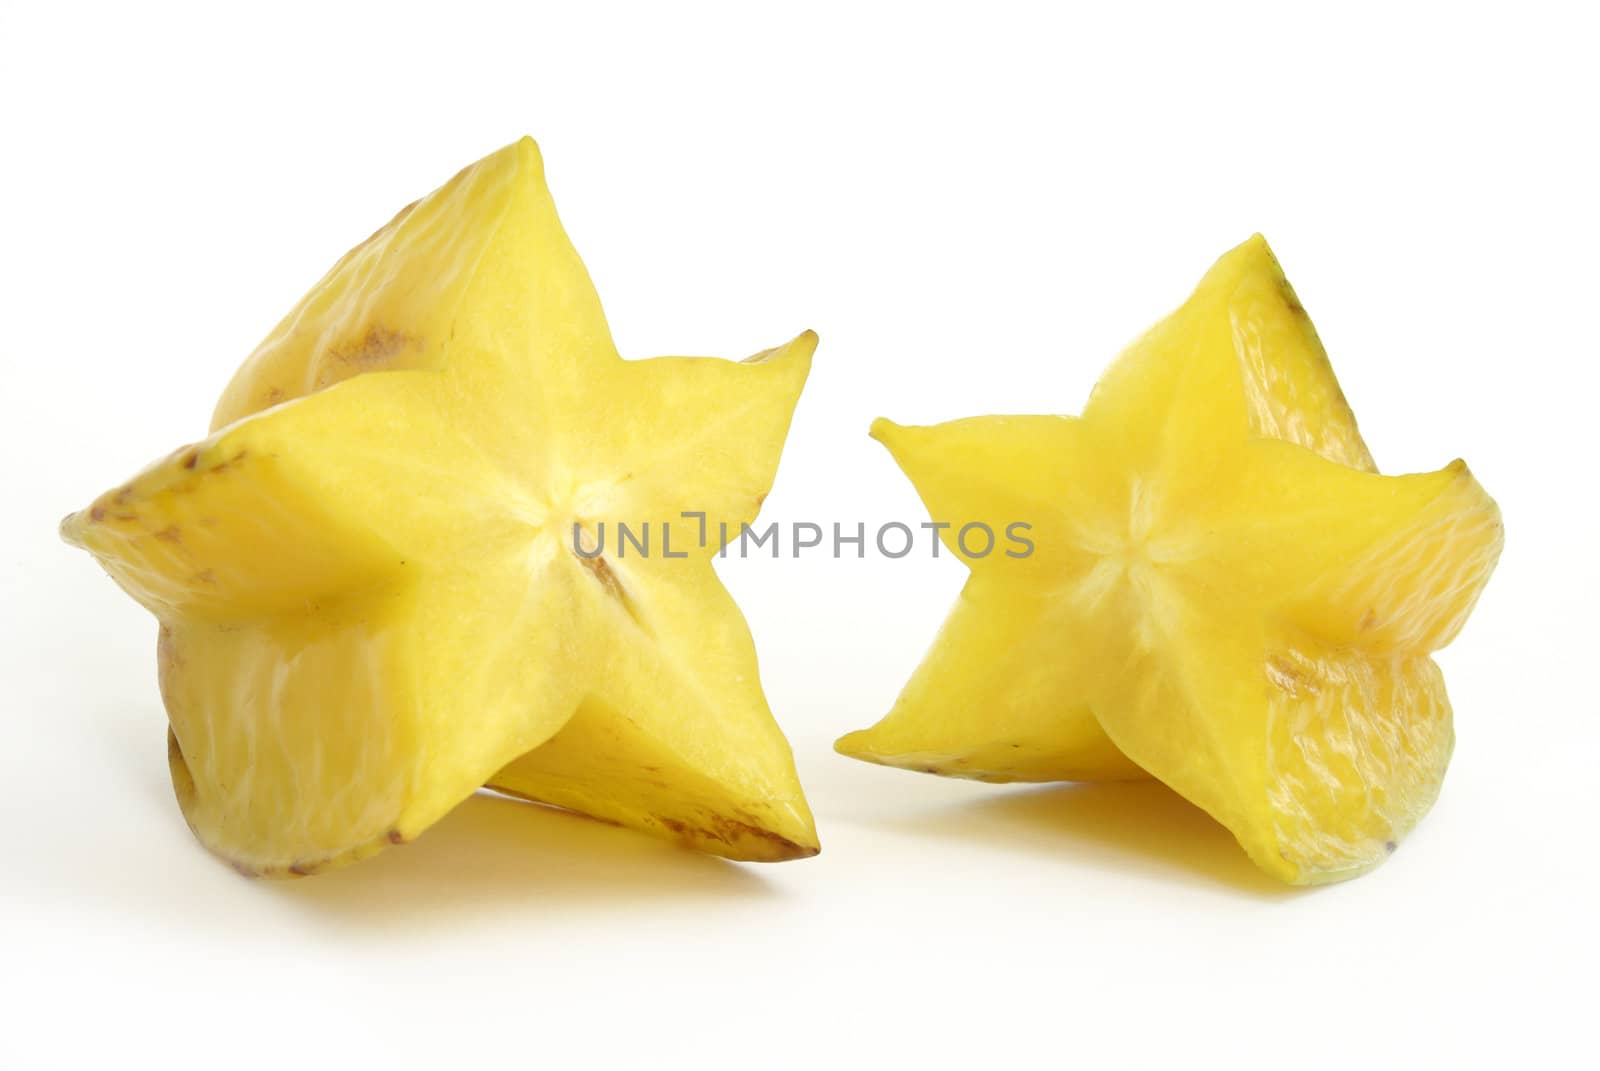 A yellow starfruit that has been cut in half.